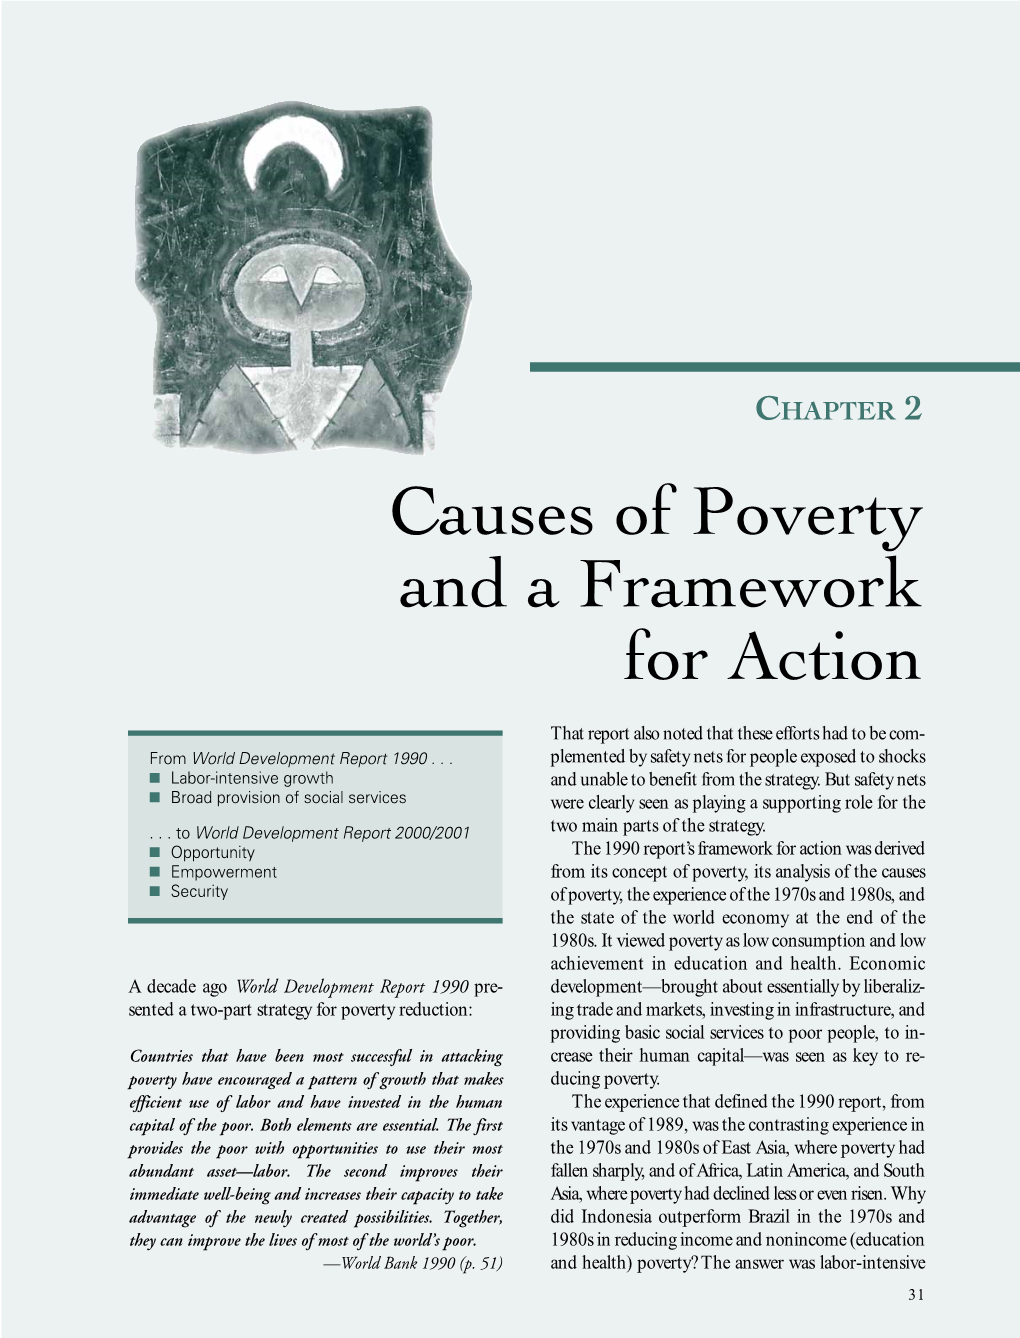 Causes of Poverty and a Framework for Action